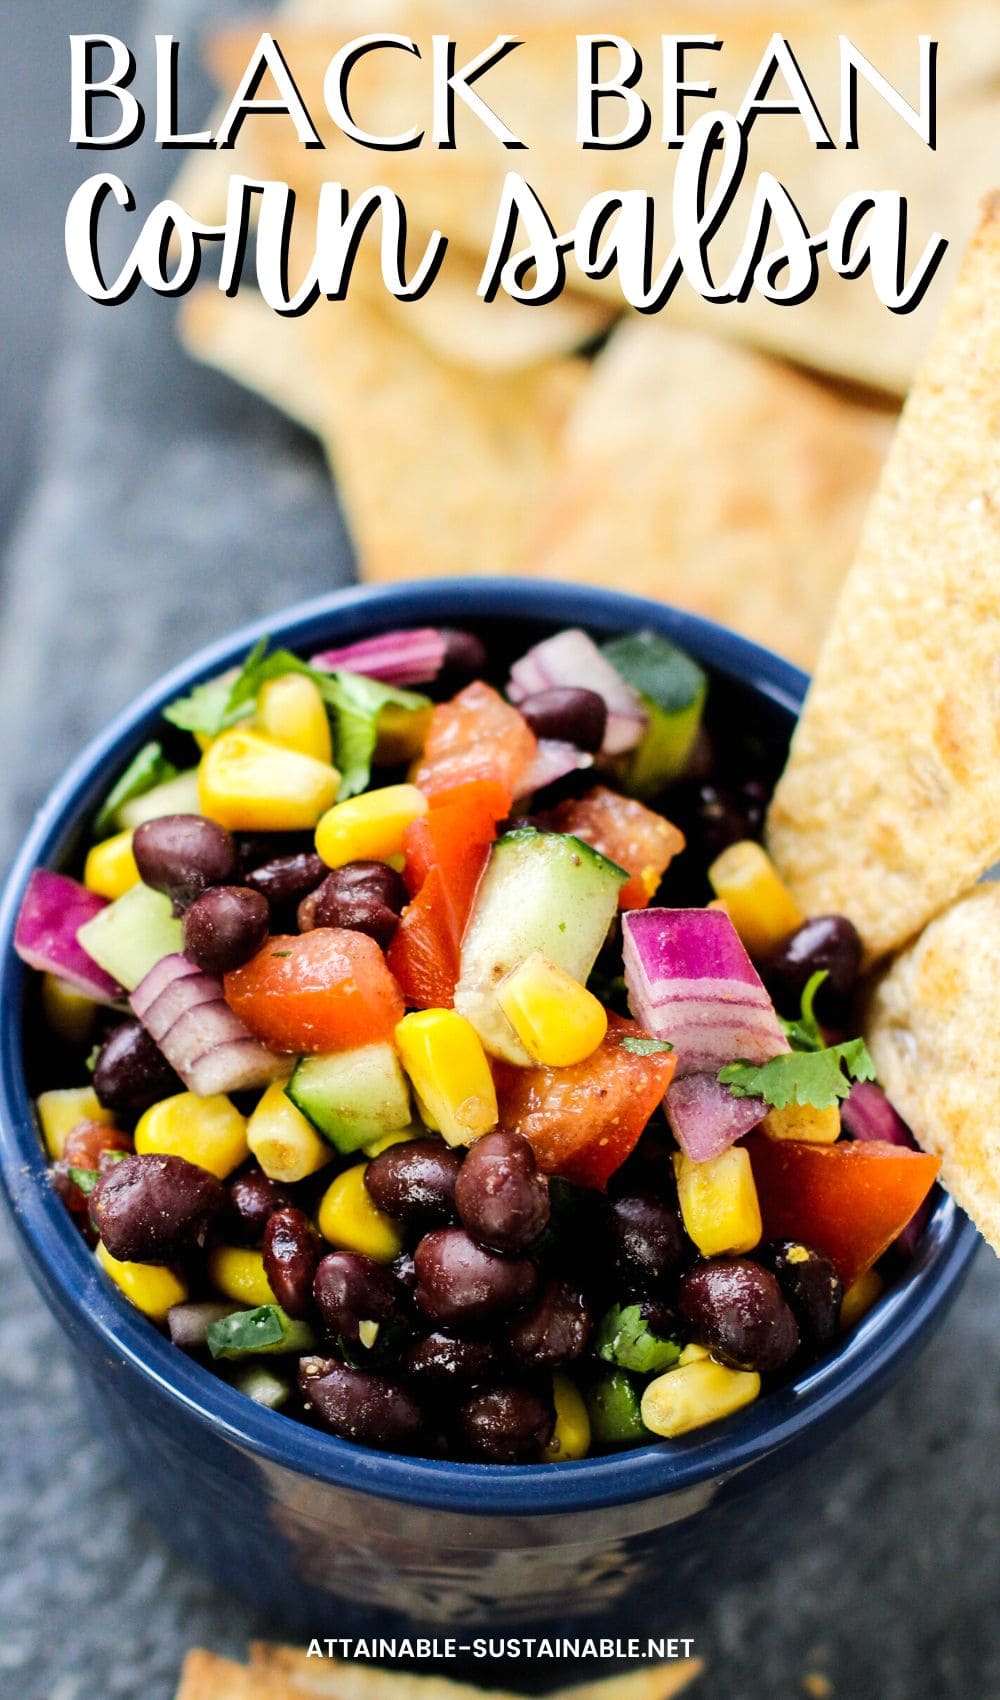 black bean dip with whole beans, corn, and veggies in a blue bowl.